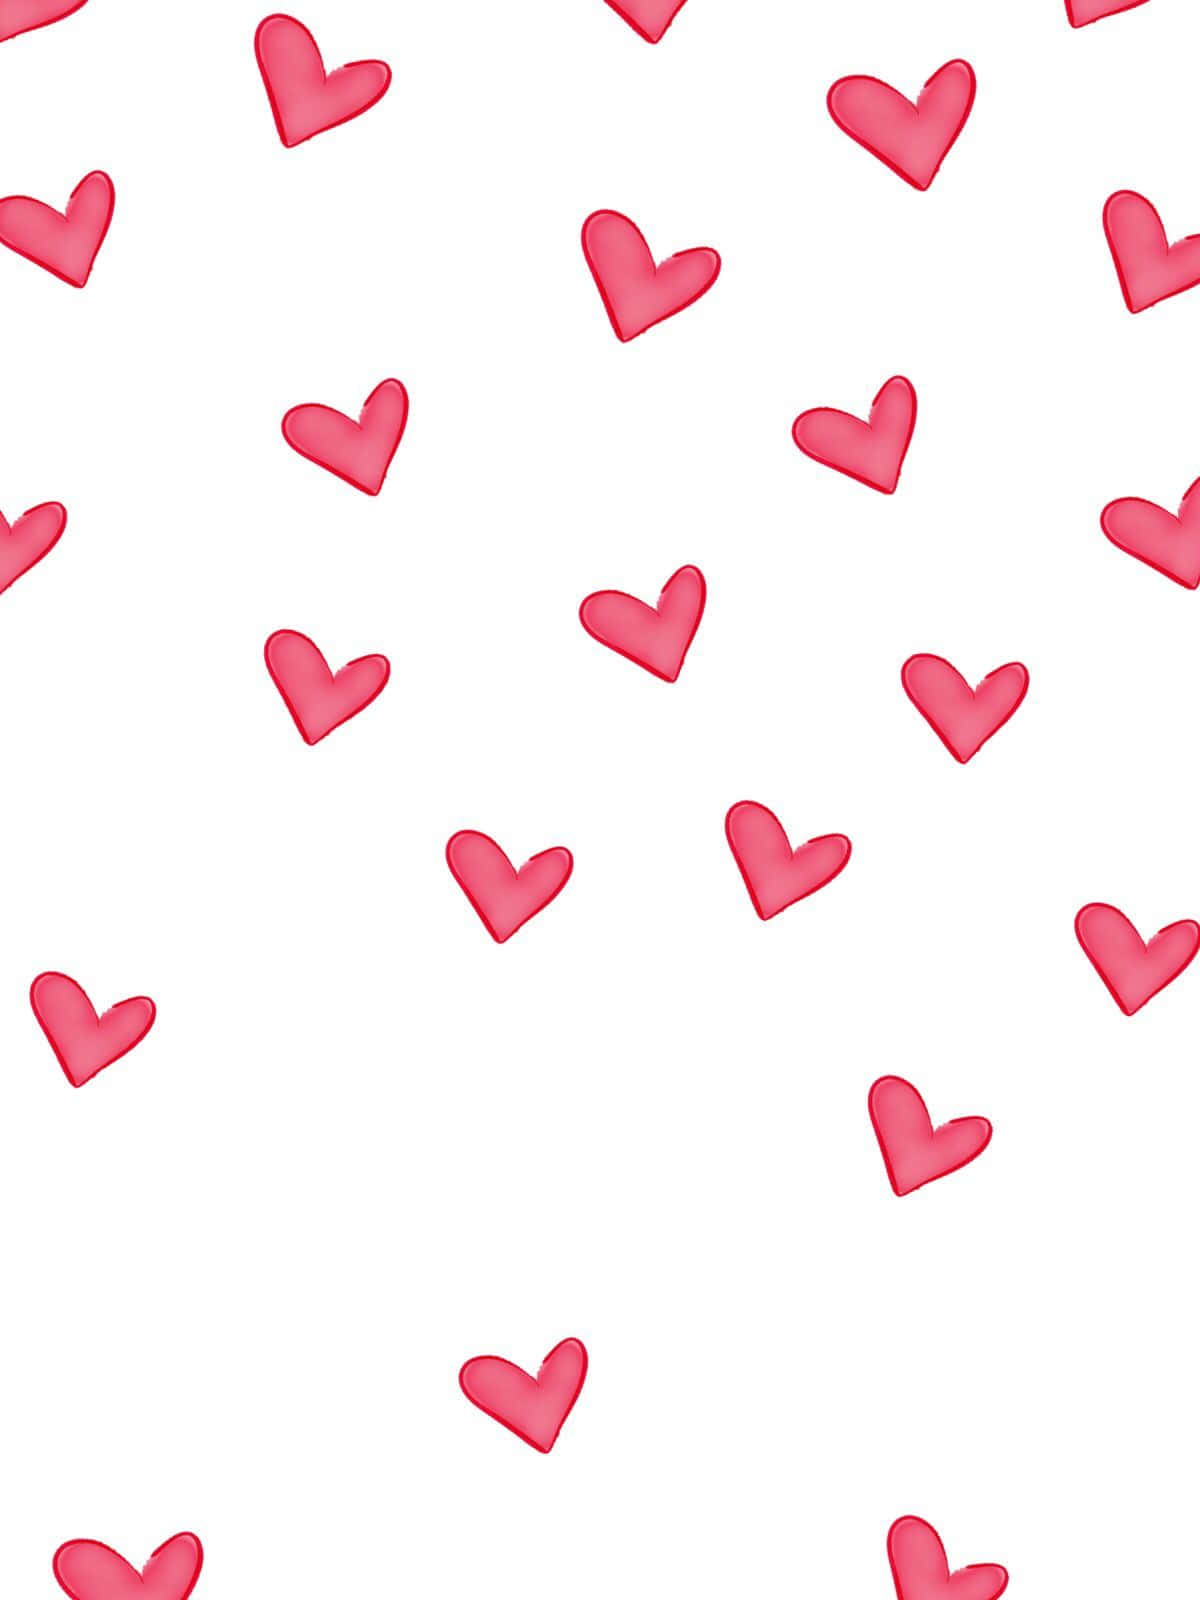 A Pink Heart Pattern On A White Background Wallpaper